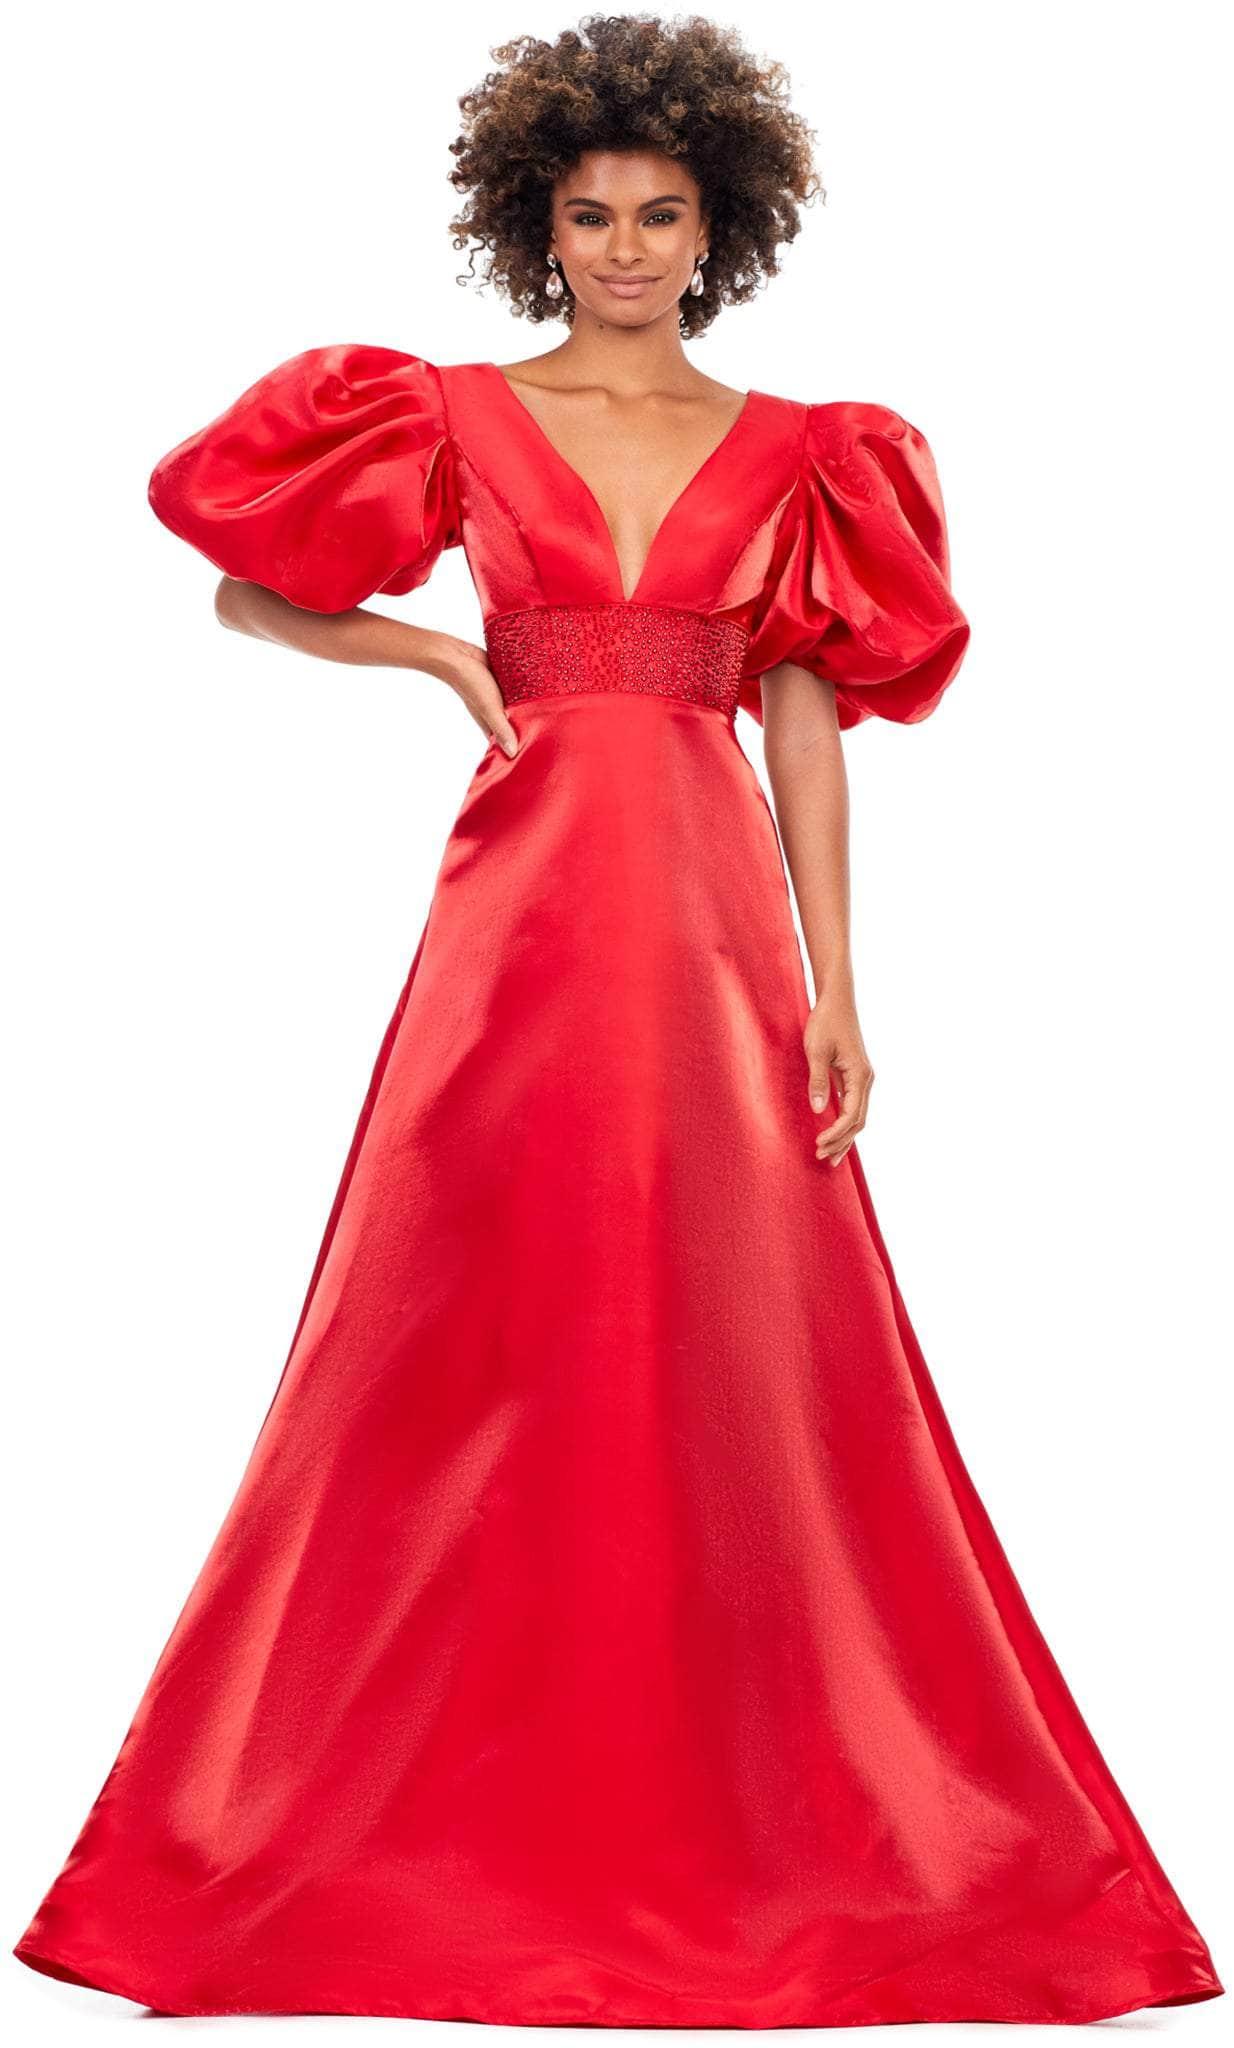 Ashley Lauren 11378 - Puffed Sleeves Prom Gown Special Occasion Dress 0 / Red